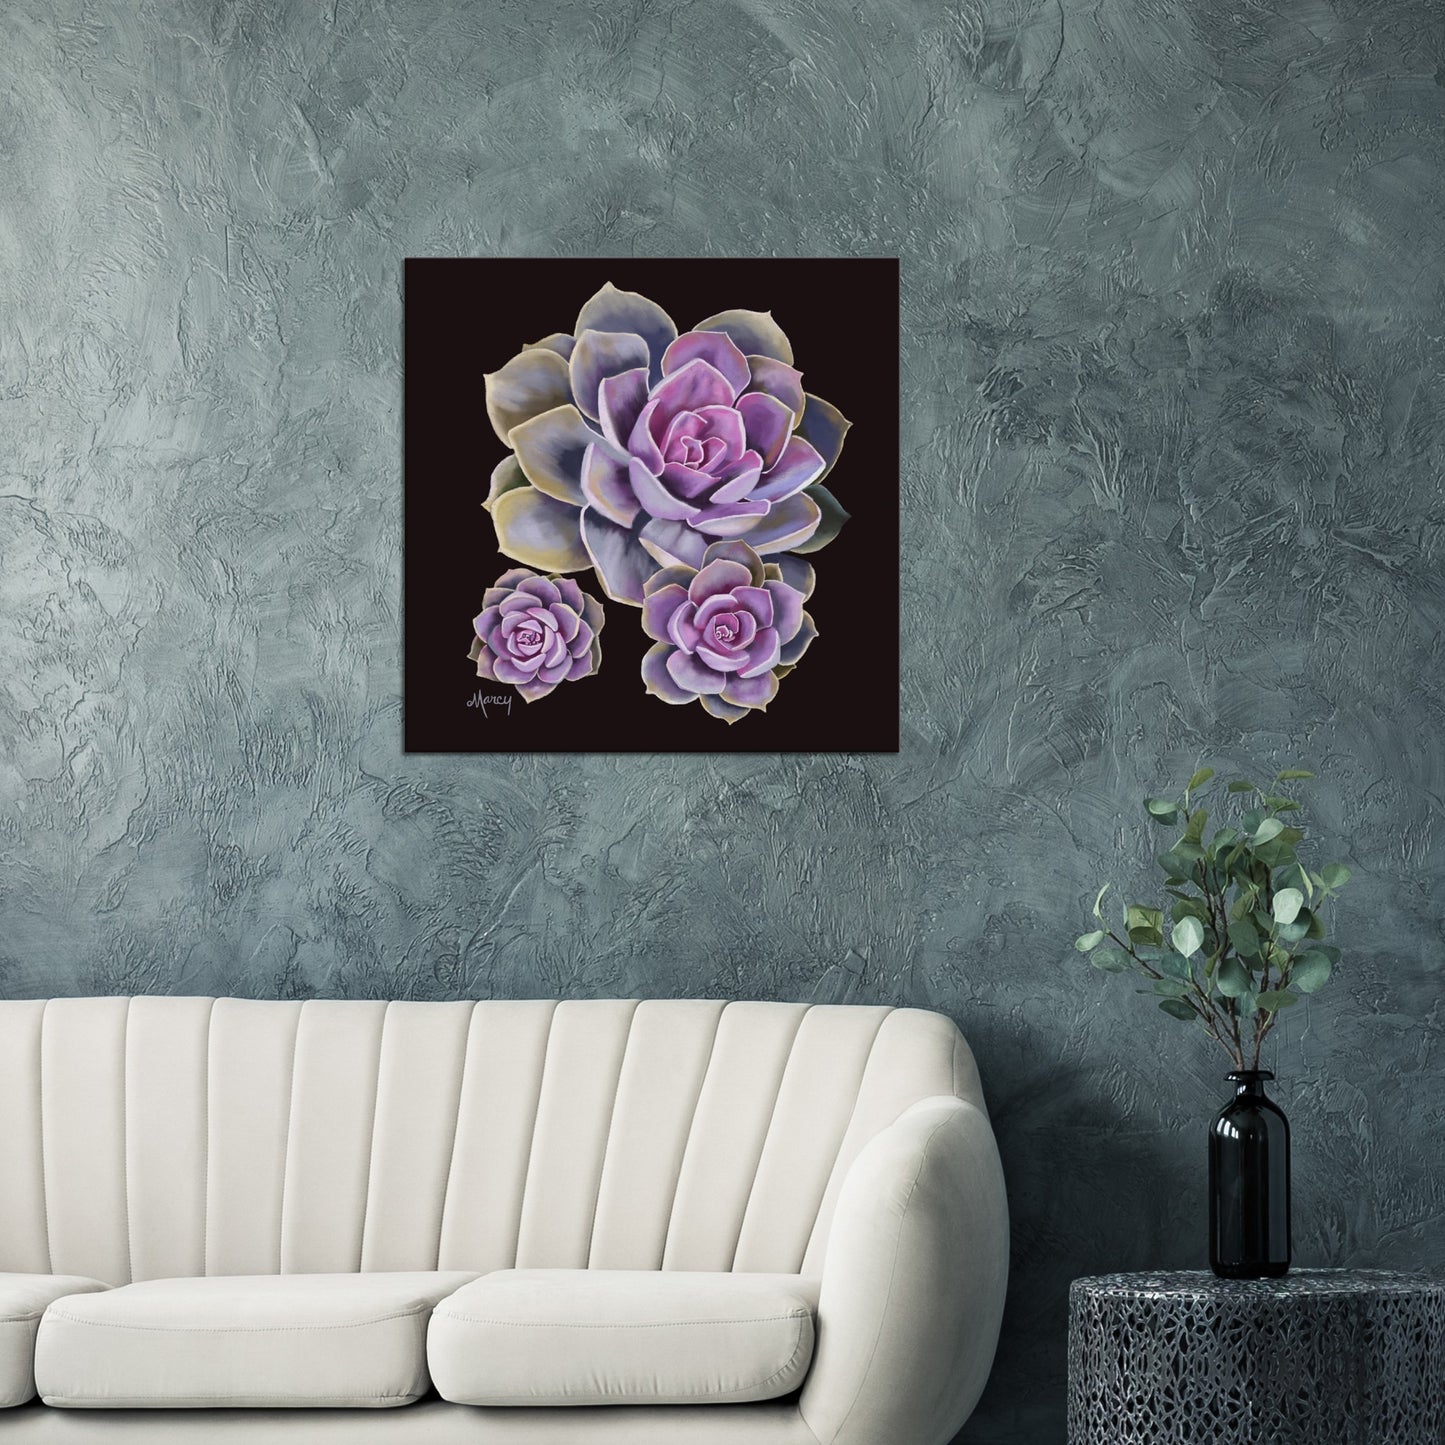 Succulent of the Month | June | on Stretched Canvas | Echeveria Succulent